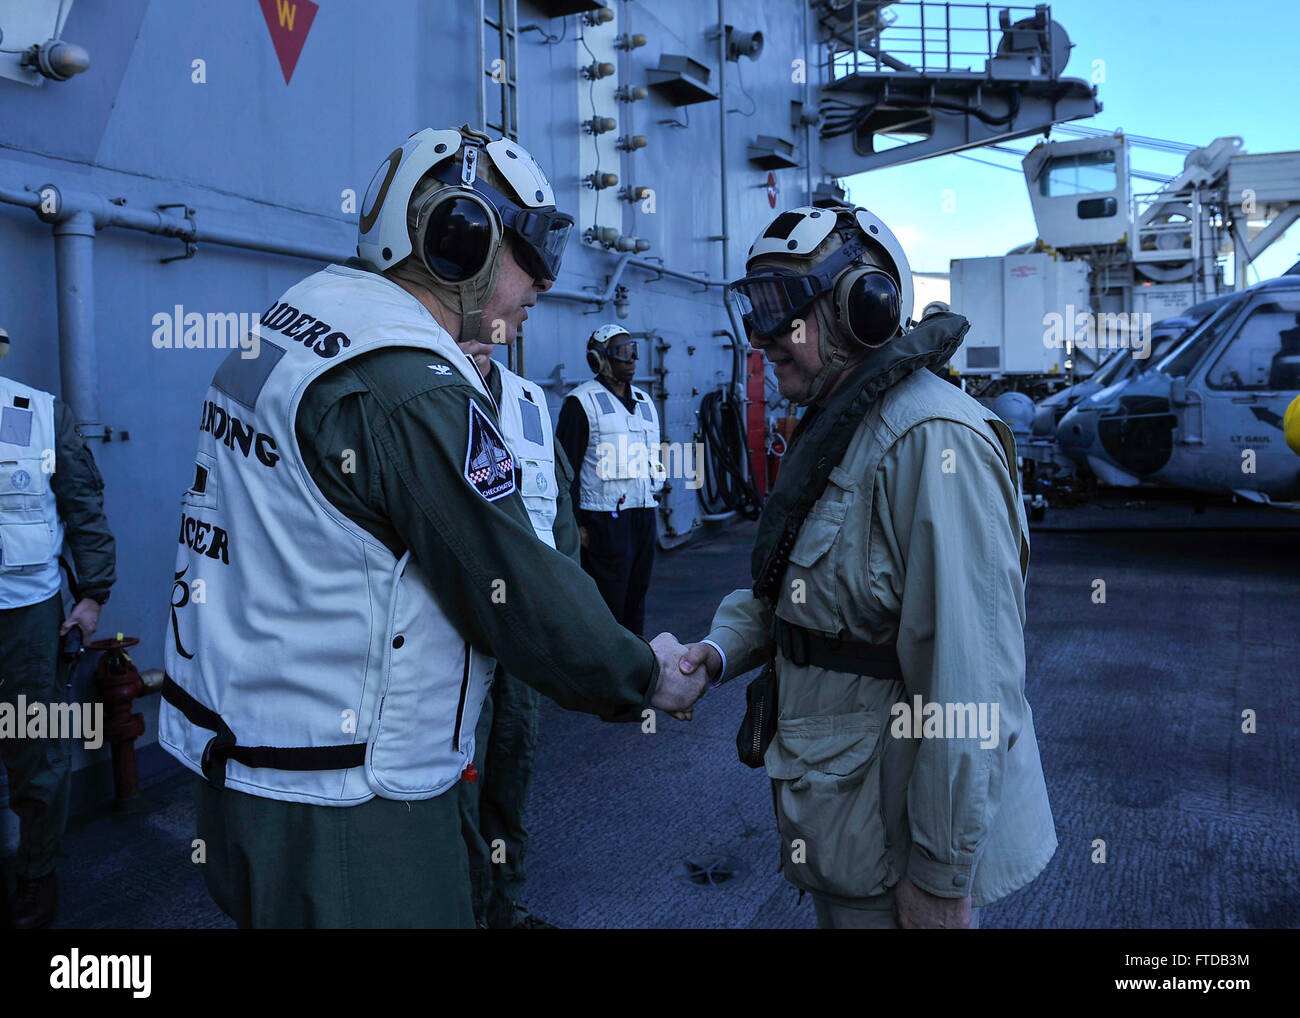 150403-N-GR120-271 MEDITERRANEAN SEA (April 03, 2015) - Capt. Daniel C. Grieco, commanding officer of the Nimitz-class aircraft carrier USS Theodore Roosevelt (CVN 71) greets U.S. Ambassador to Greece, David D. Pearce, arriving on the TR, April 03, 2015. Theodore Roosevelt hosted Pearce, and other senior Greek government and military officials  as part of the distinguished visitors program. Theodore Roosevelt deployed from Norfolk and will execute a homeport shift to San Diego at the conclusion of deployment. Theodore Roosevelt is conducting naval operations in the U.S. 6th Fleet area of opera Stock Photo